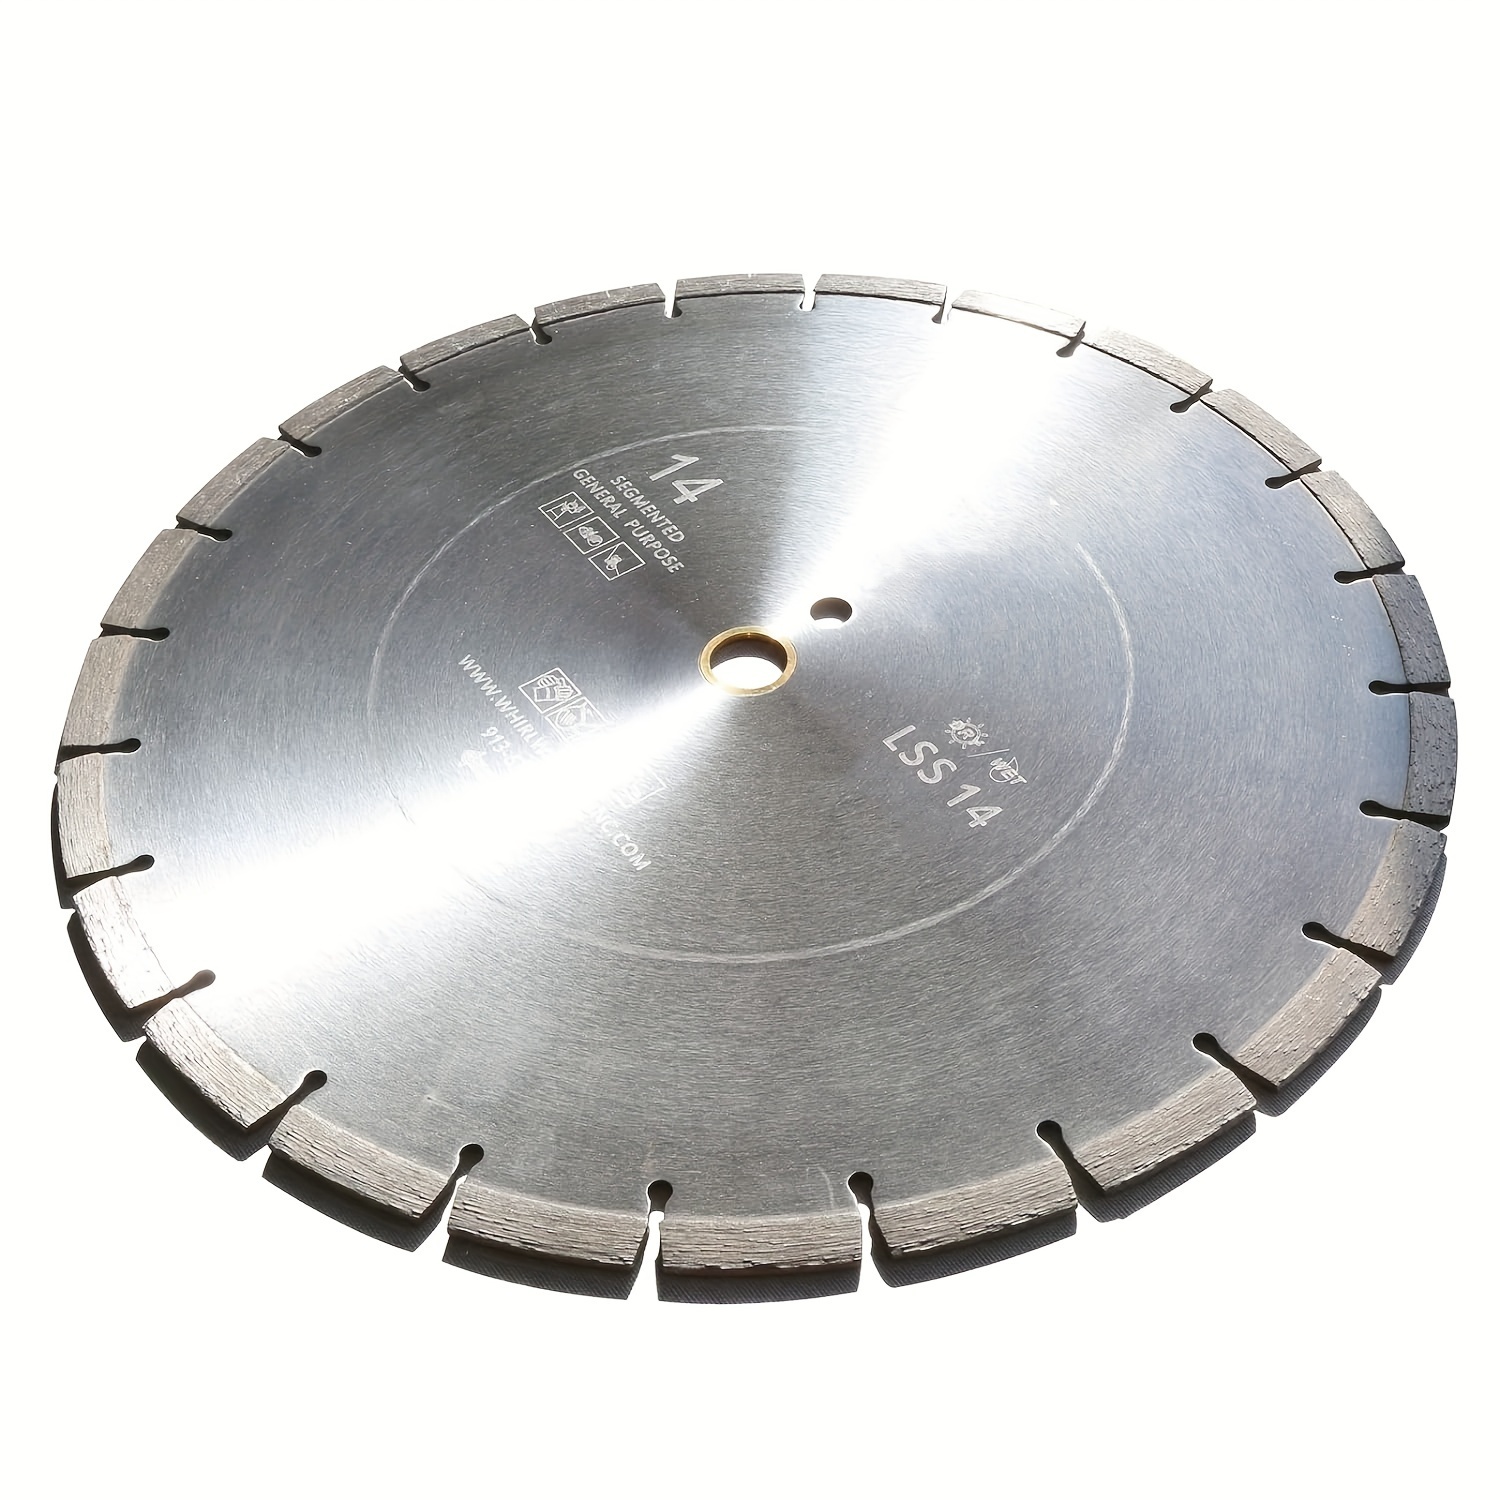 

14 Inch Diamond Concrete Saw Blade, 14 Inch Masonry Blade With 5/8 Inch Arbor, Sharp Tile Saw Blade Dry Or Wet Cutting For Brick Paves Concrete Stone Block Marble Granite